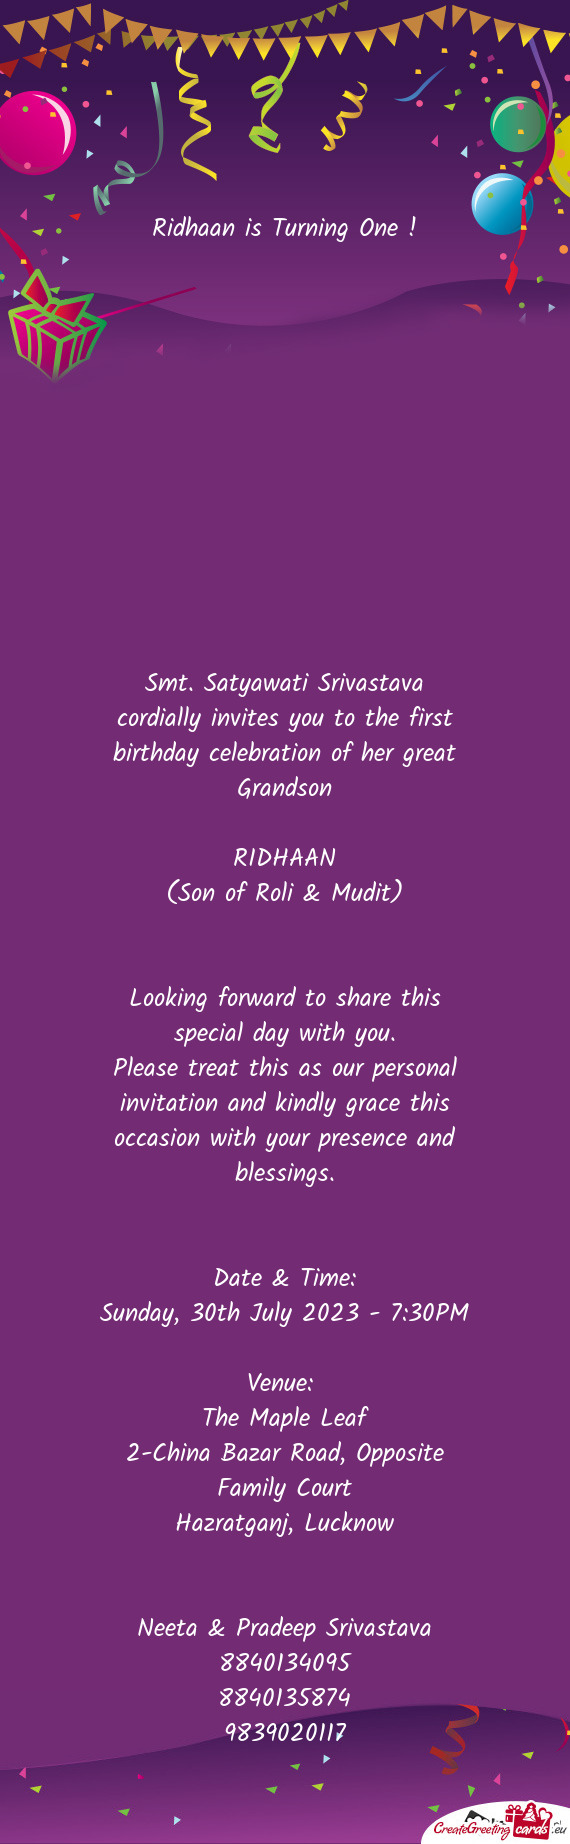 Smt. Satyawati Srivastava cordially invites you to the first birthday celebration of her great Grand